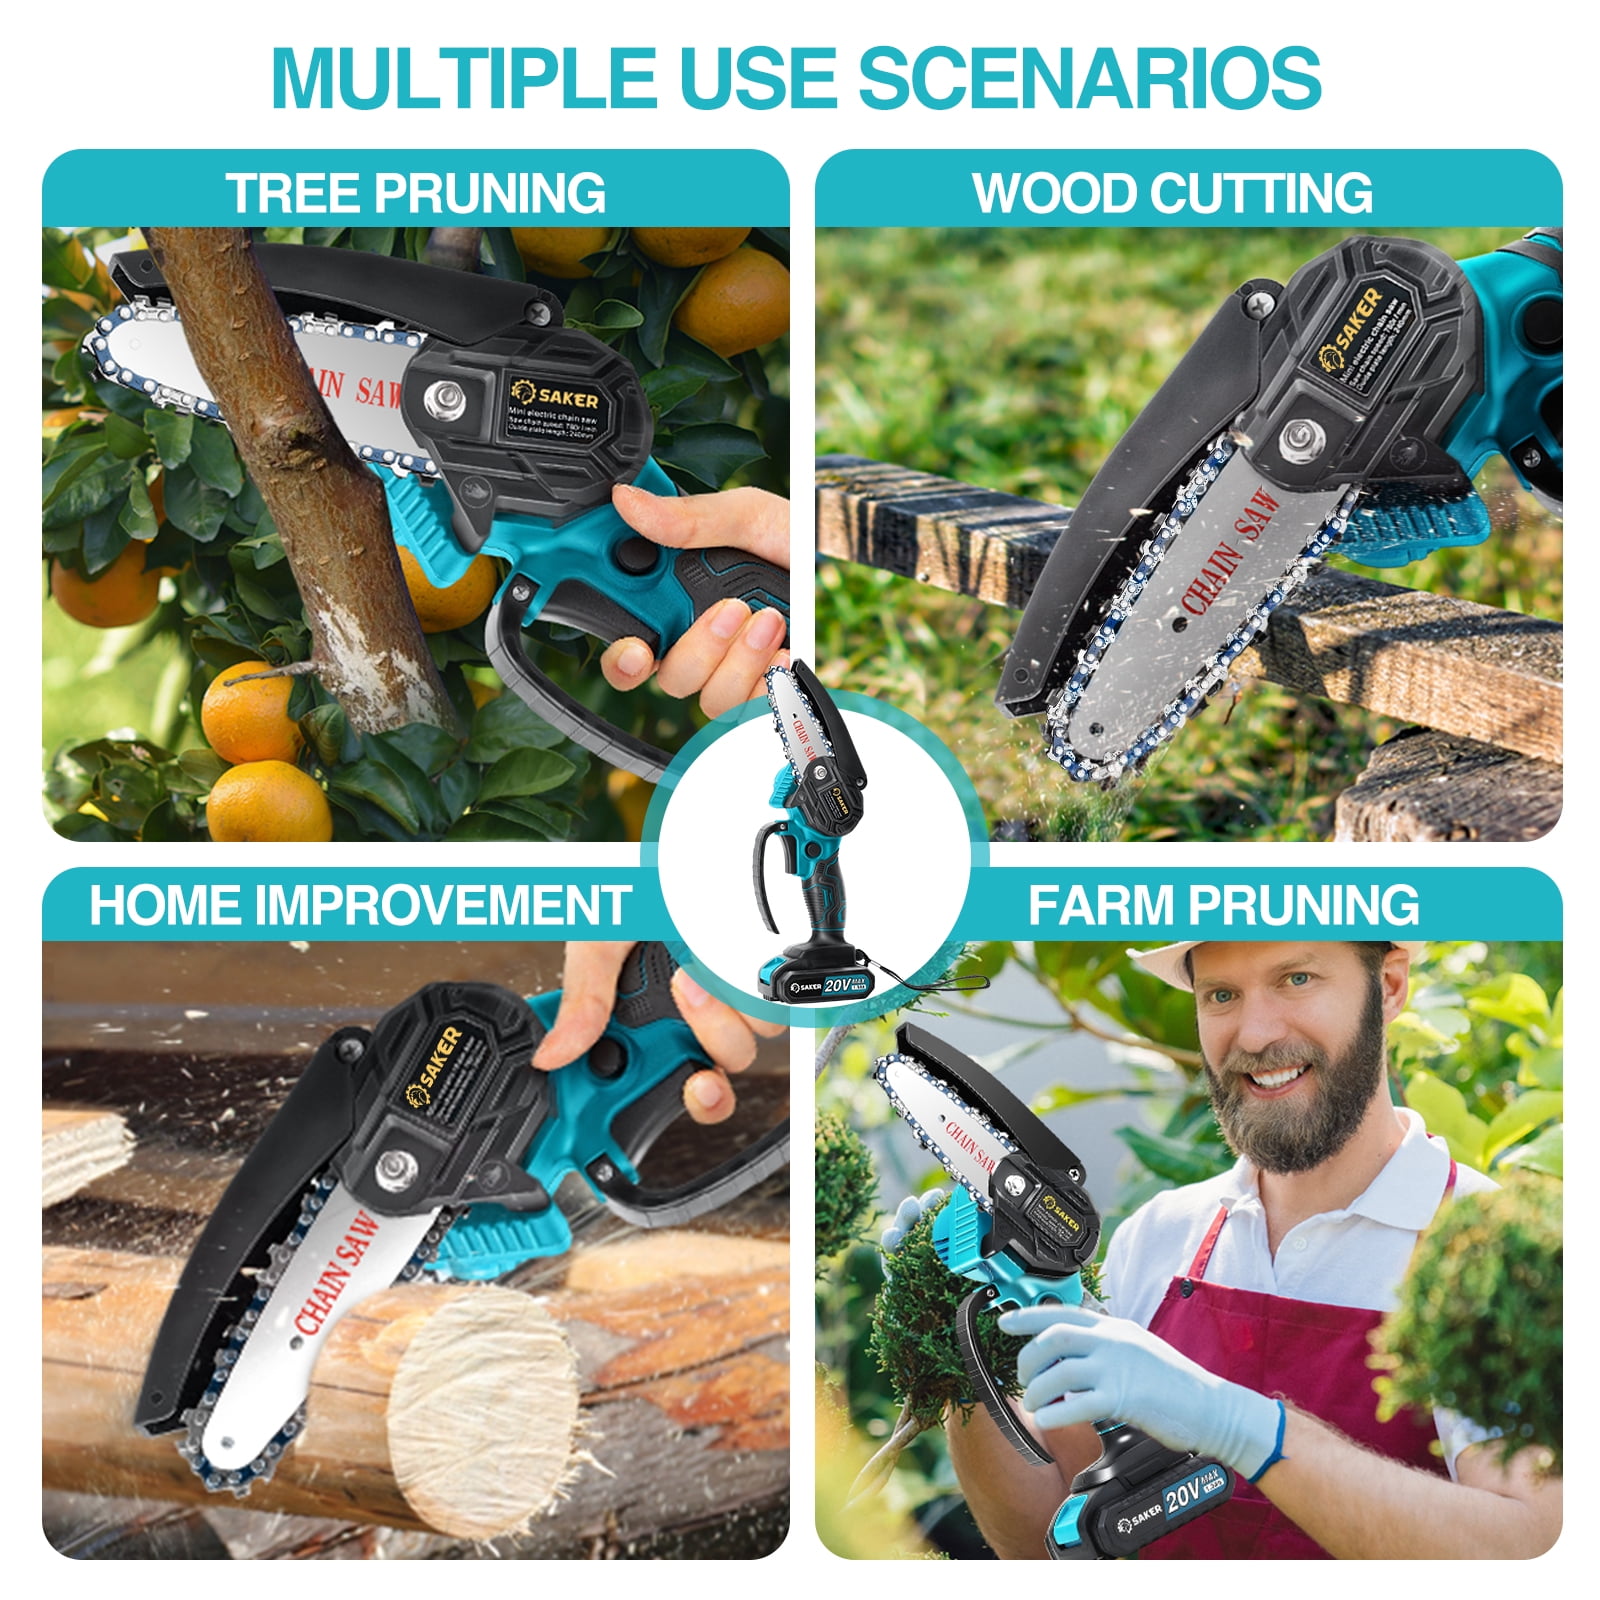 SAKER® MINI CHAINSAW 4 INCH REVIEW